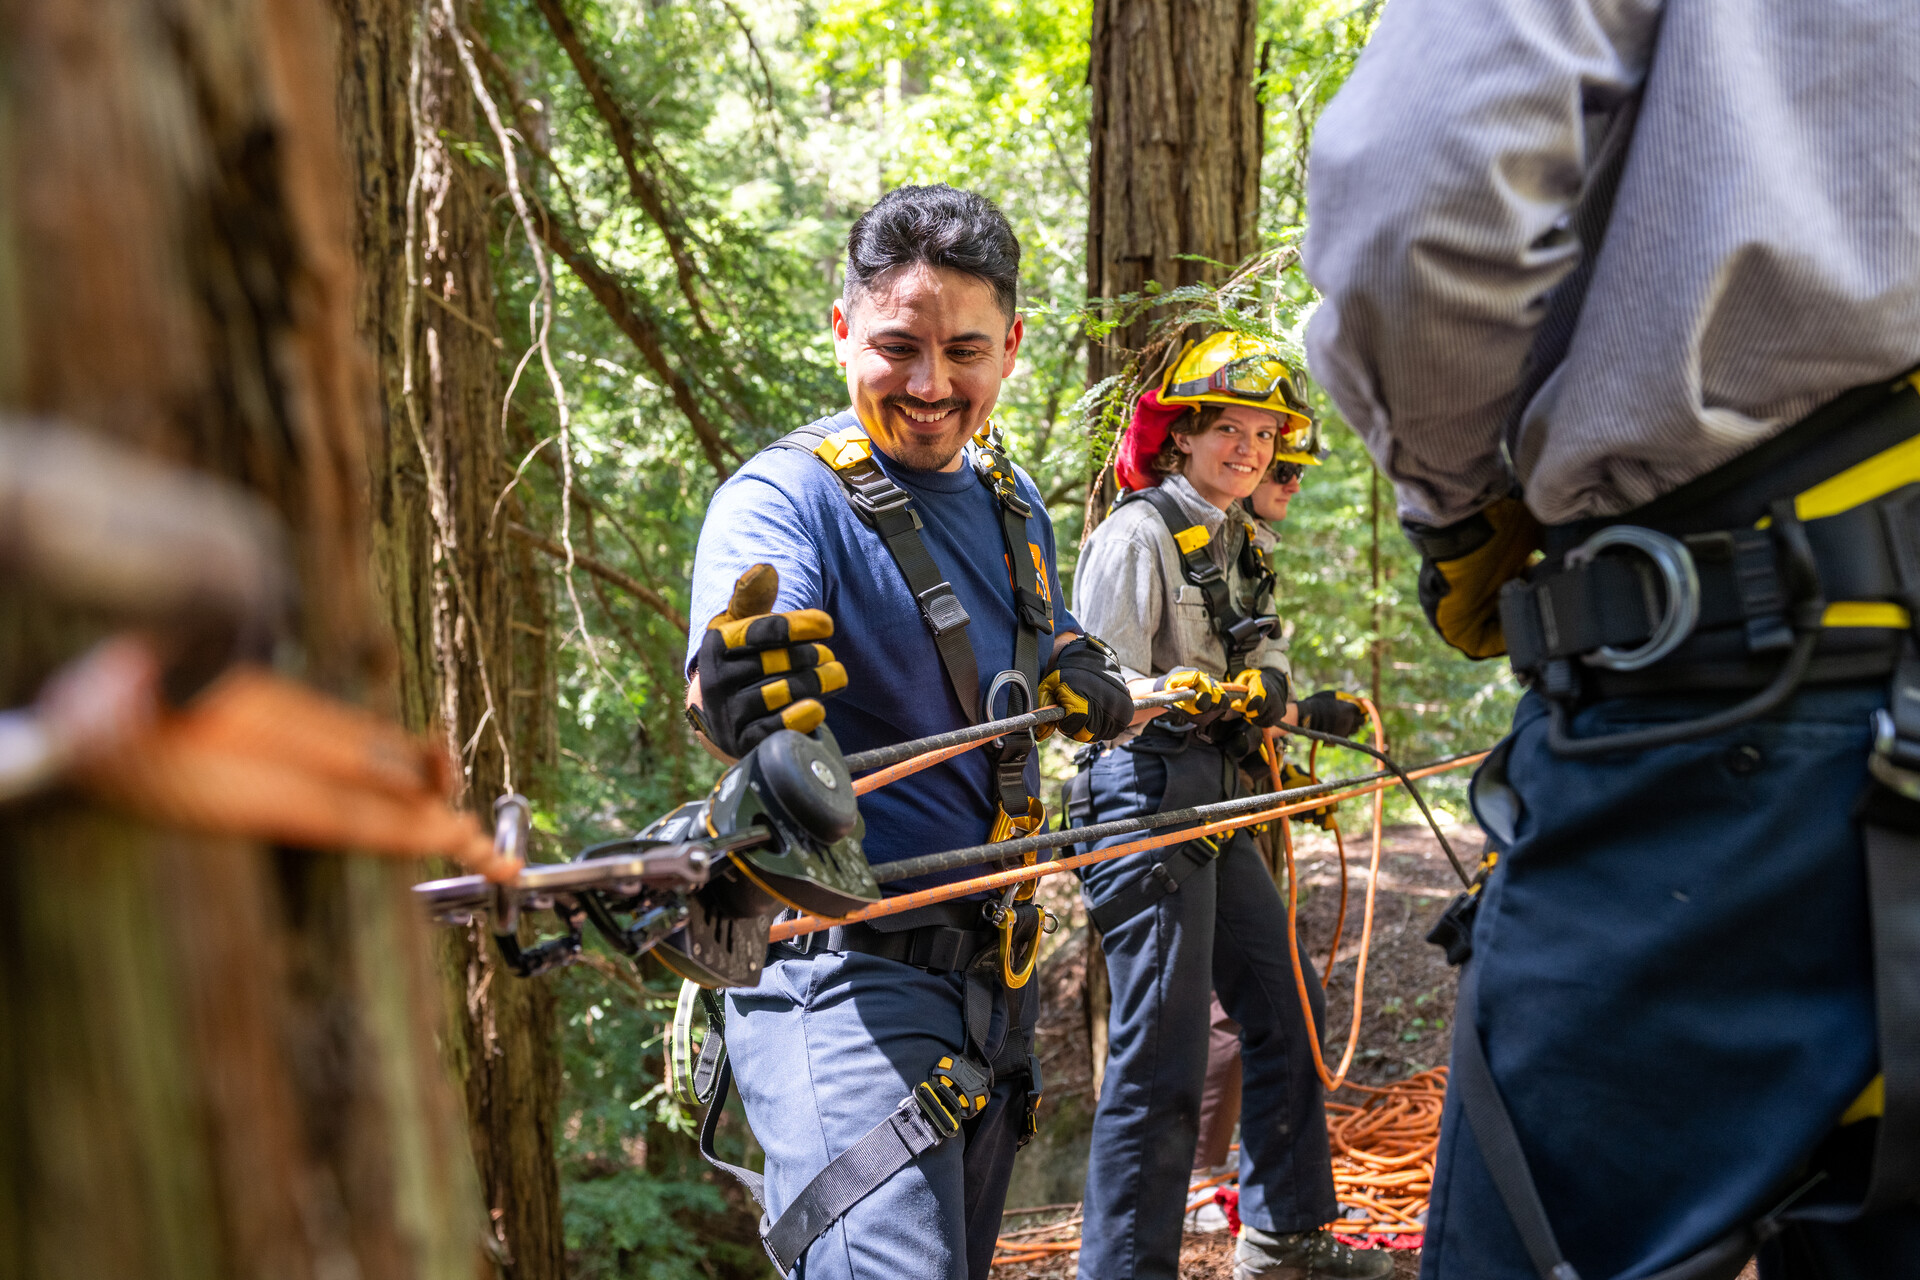 A Latino trainee smiles as he works the rope controls with a female trainee looking on and smiling in a forest setting.